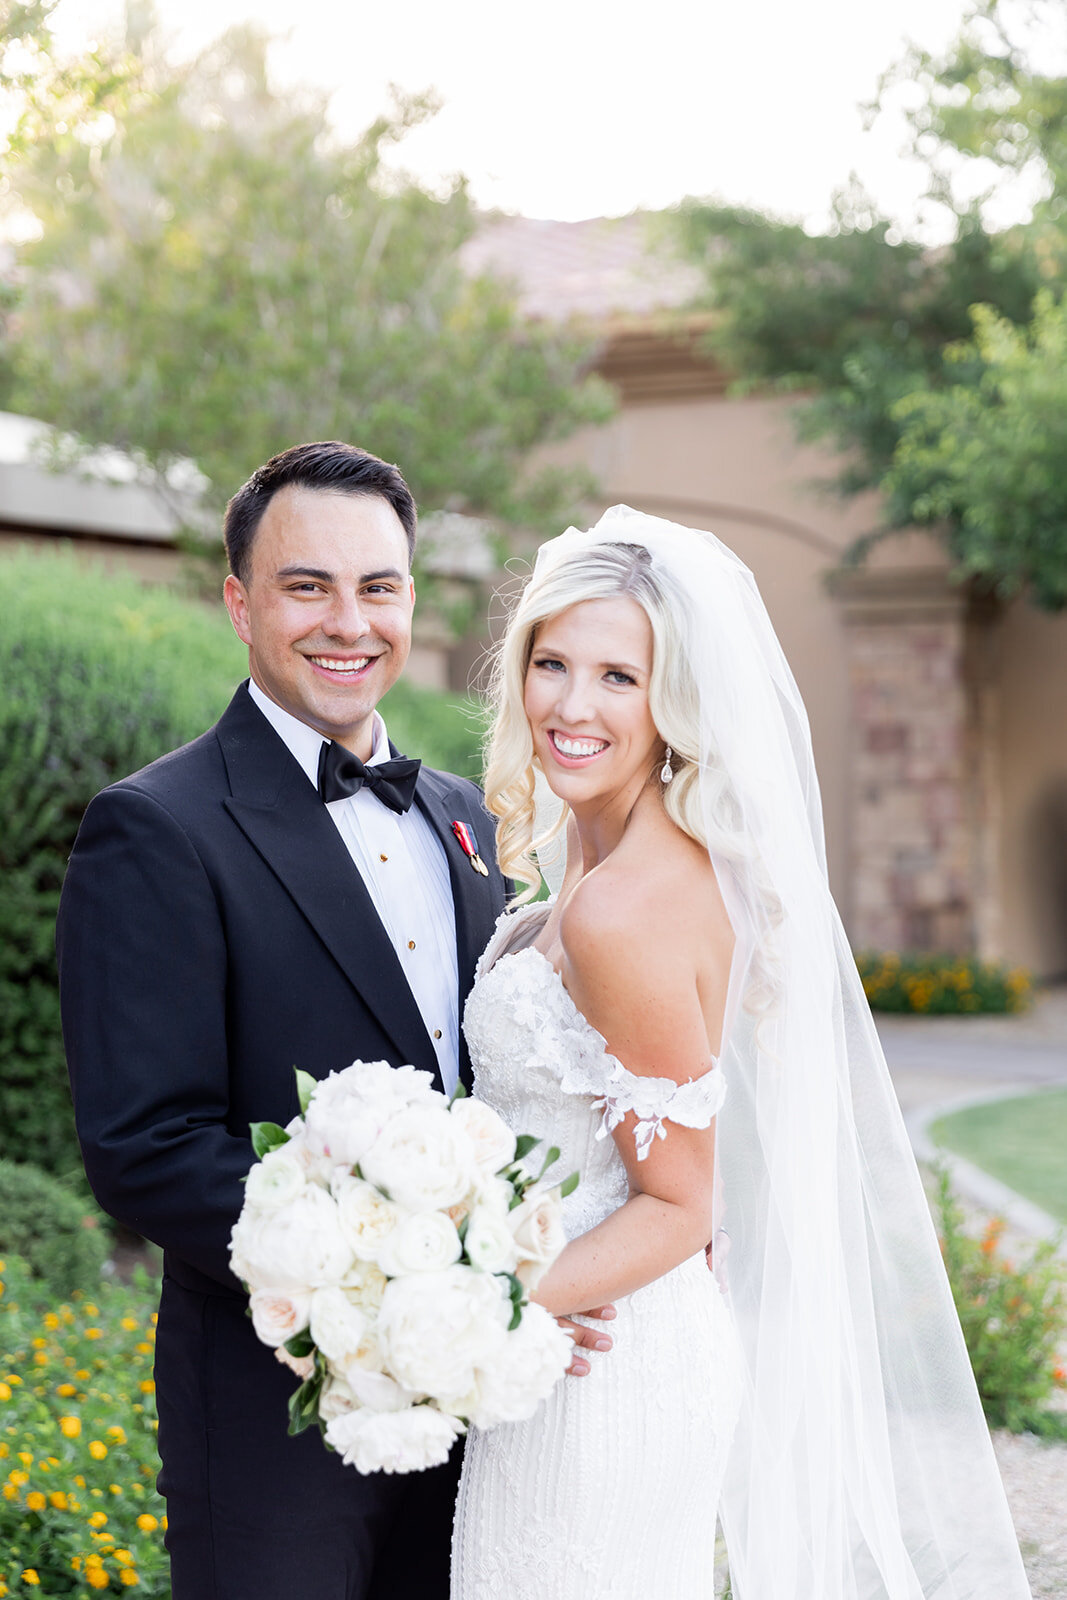 Karlie Colleen Photography - Holly & Ronnie Wedding - Seville Country Club - Gilbert Arizona-642